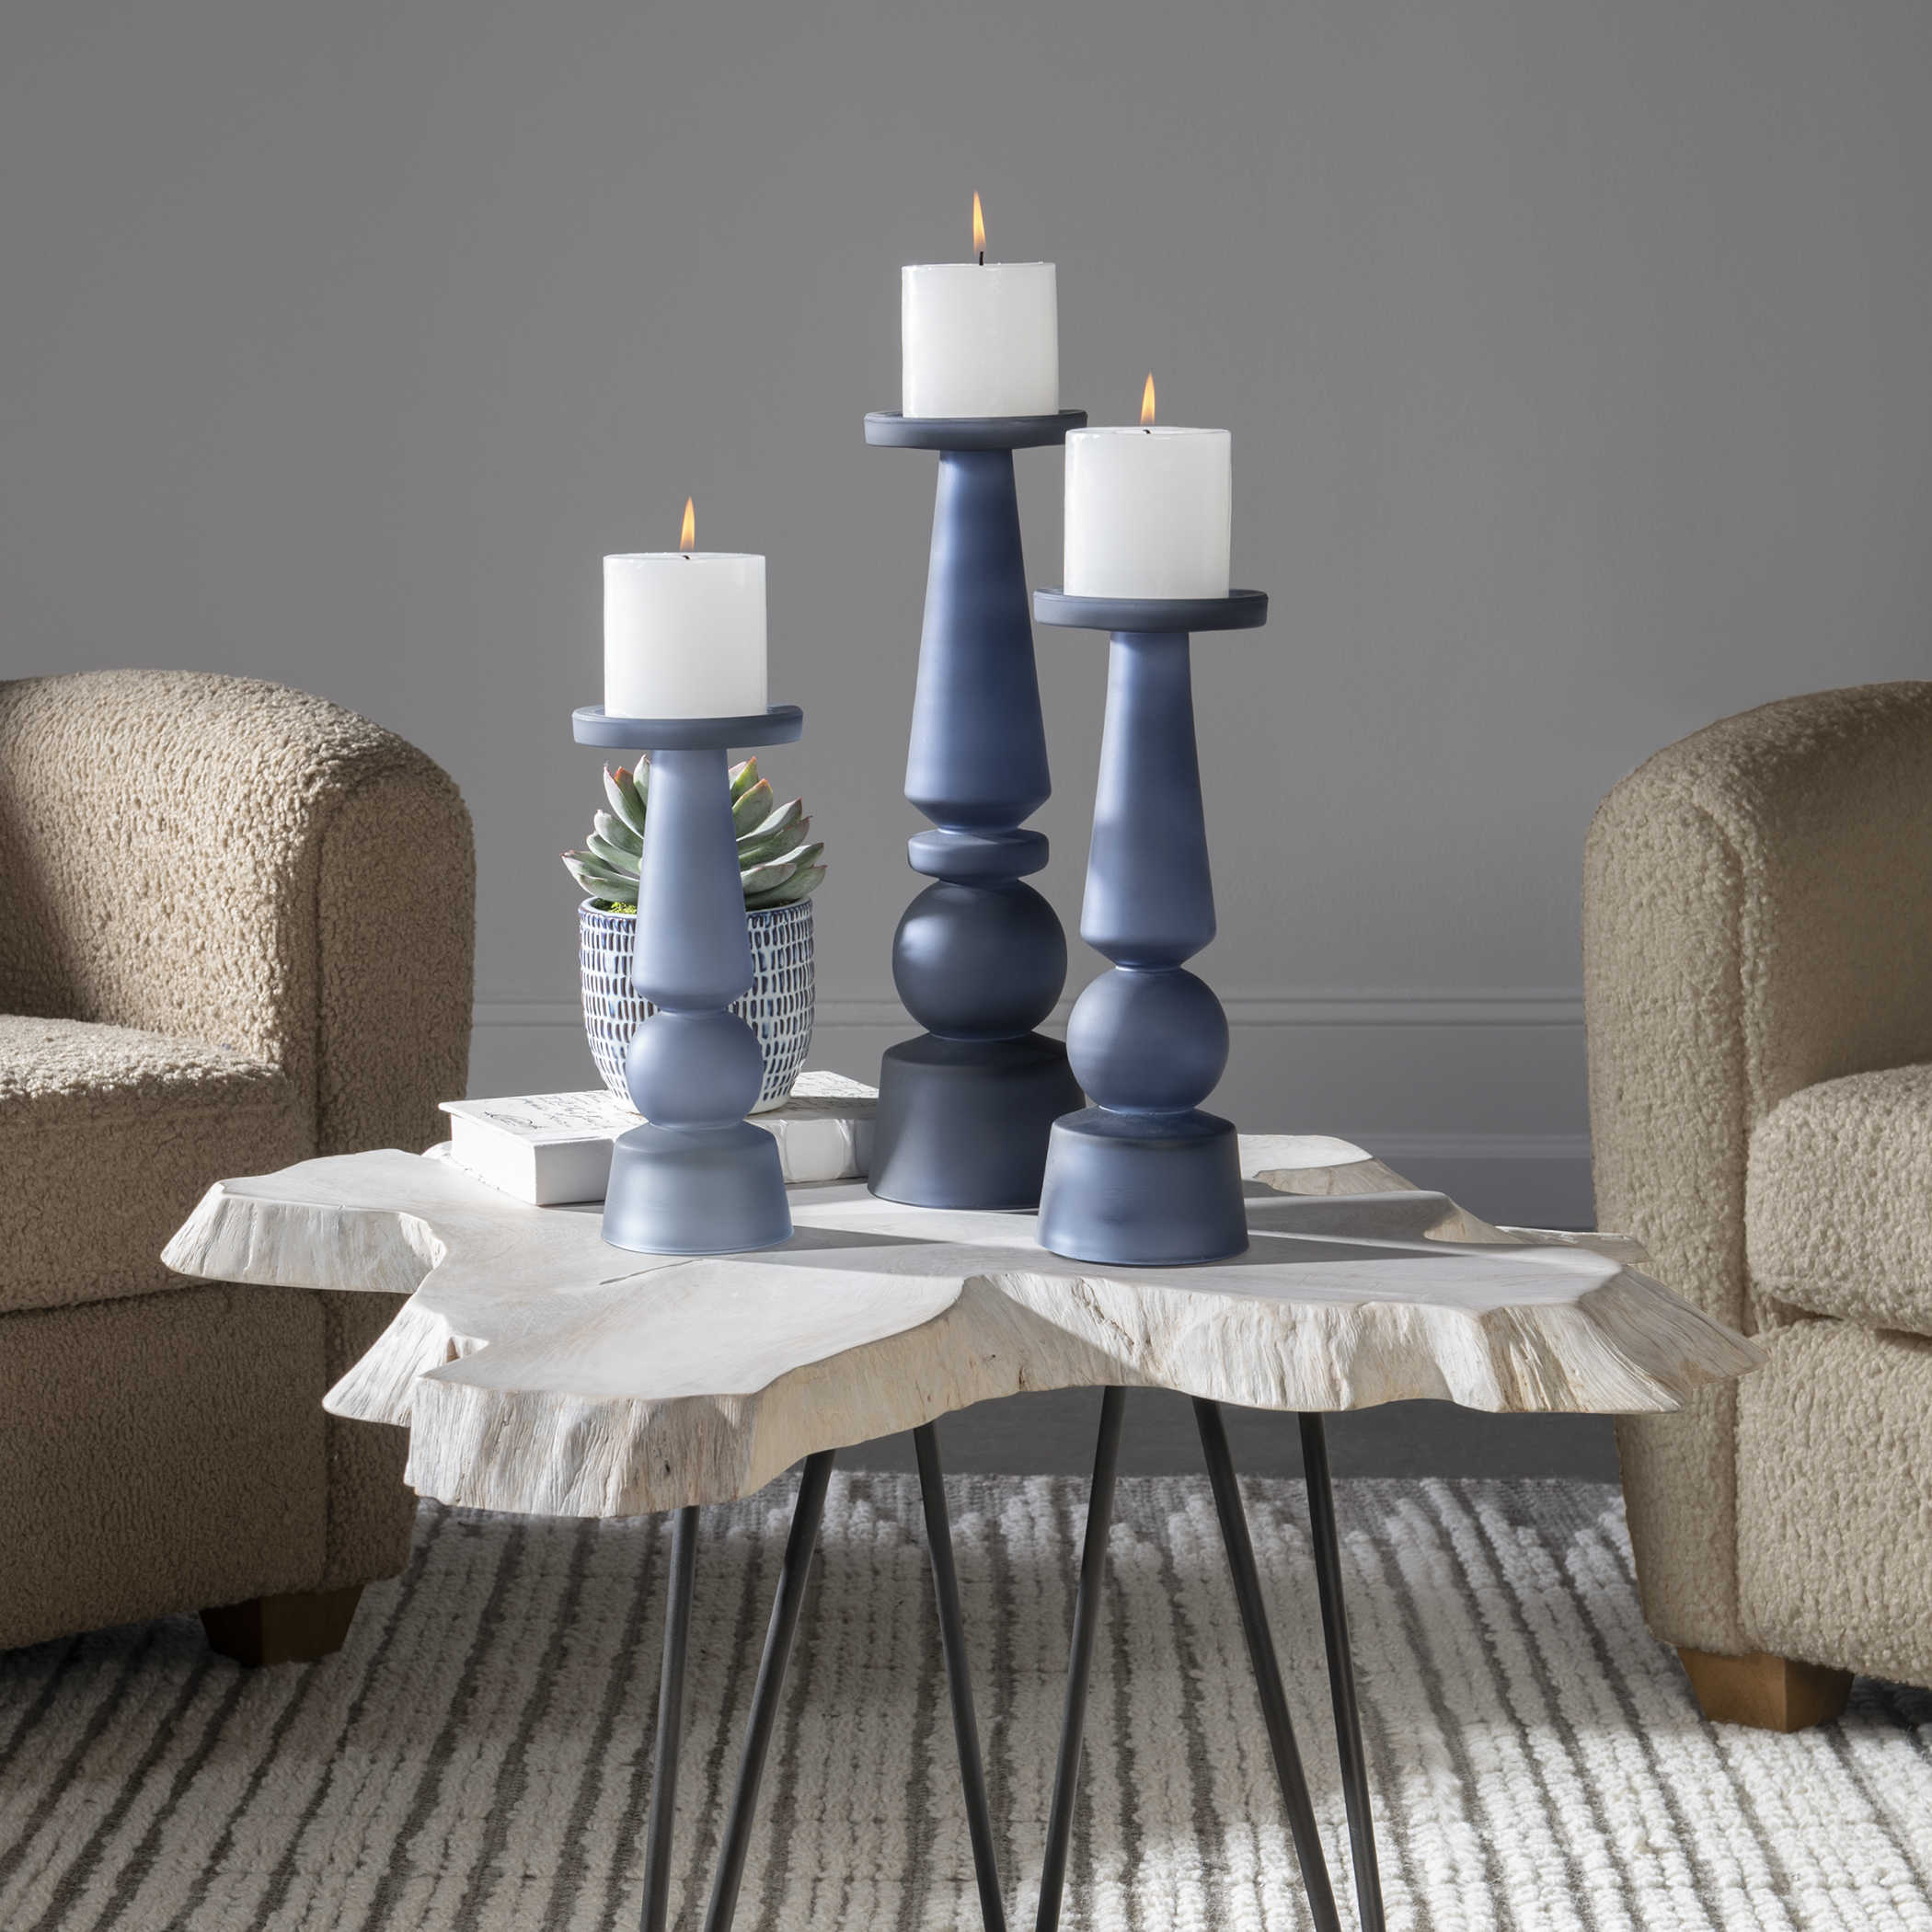 Uttermost Cassiopeia Blue Glass Candleholders, S/3